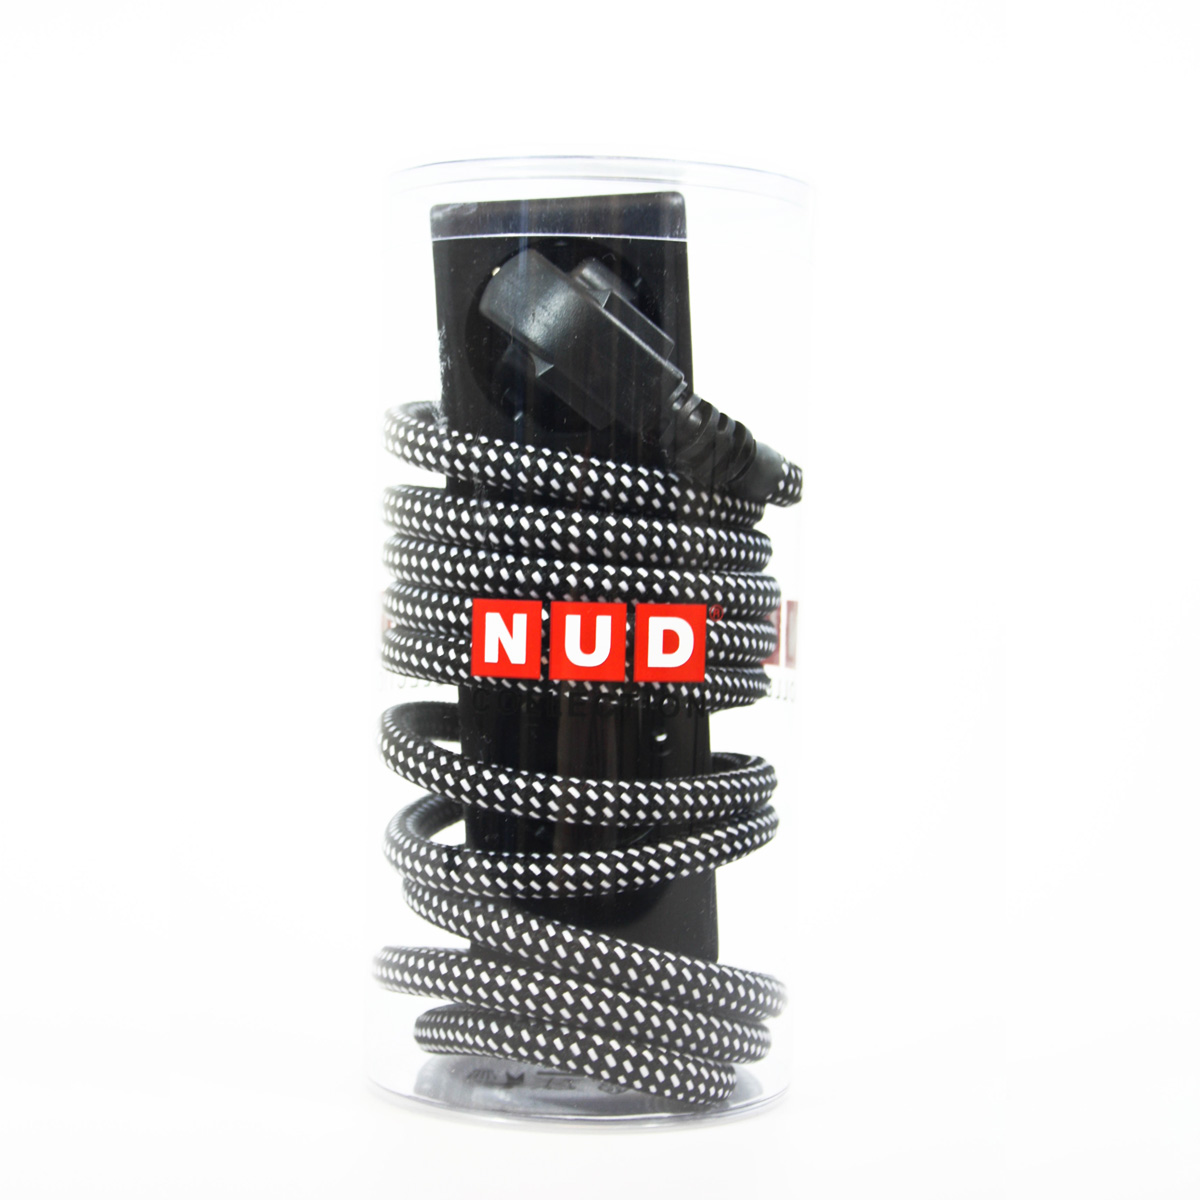 NUD Collection 3-fach Steckdose